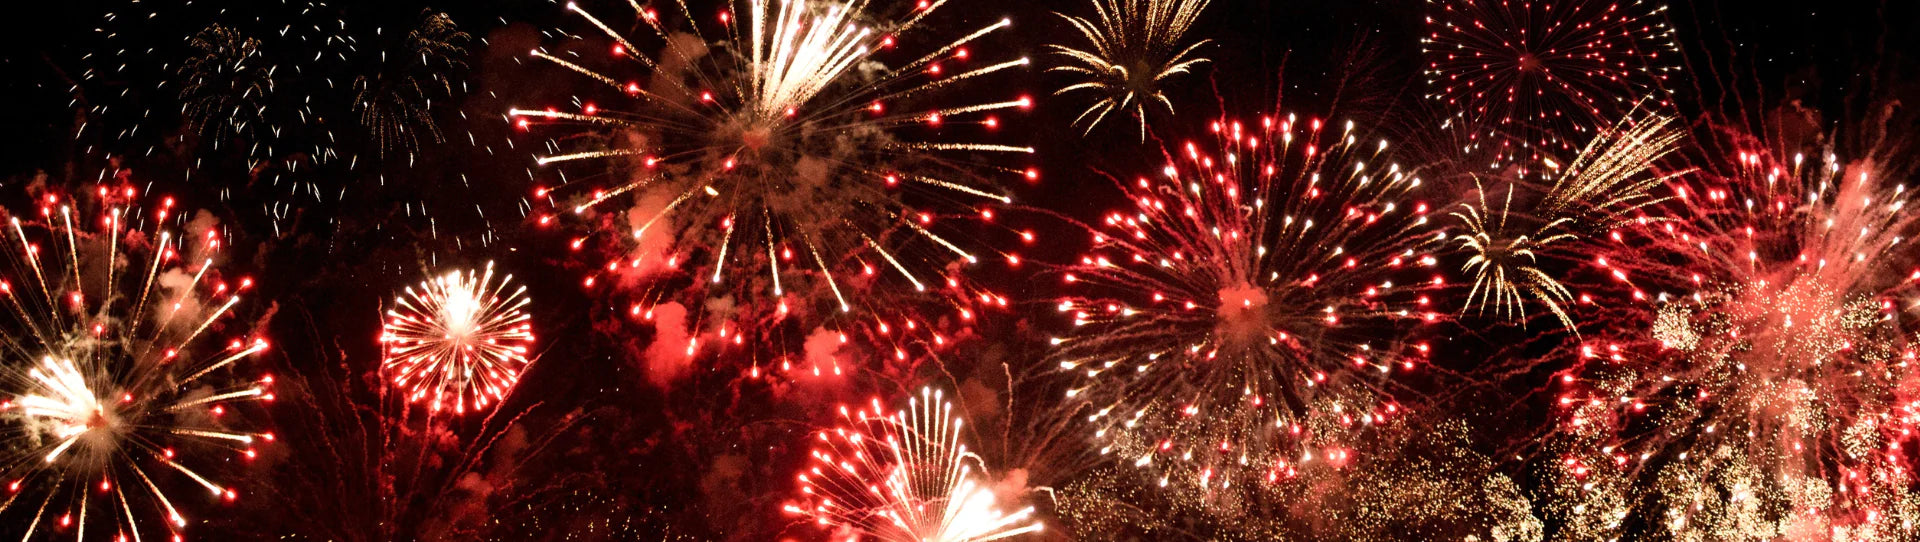 5 Dazzling Ways to Celebrate Bonfire Night at Home